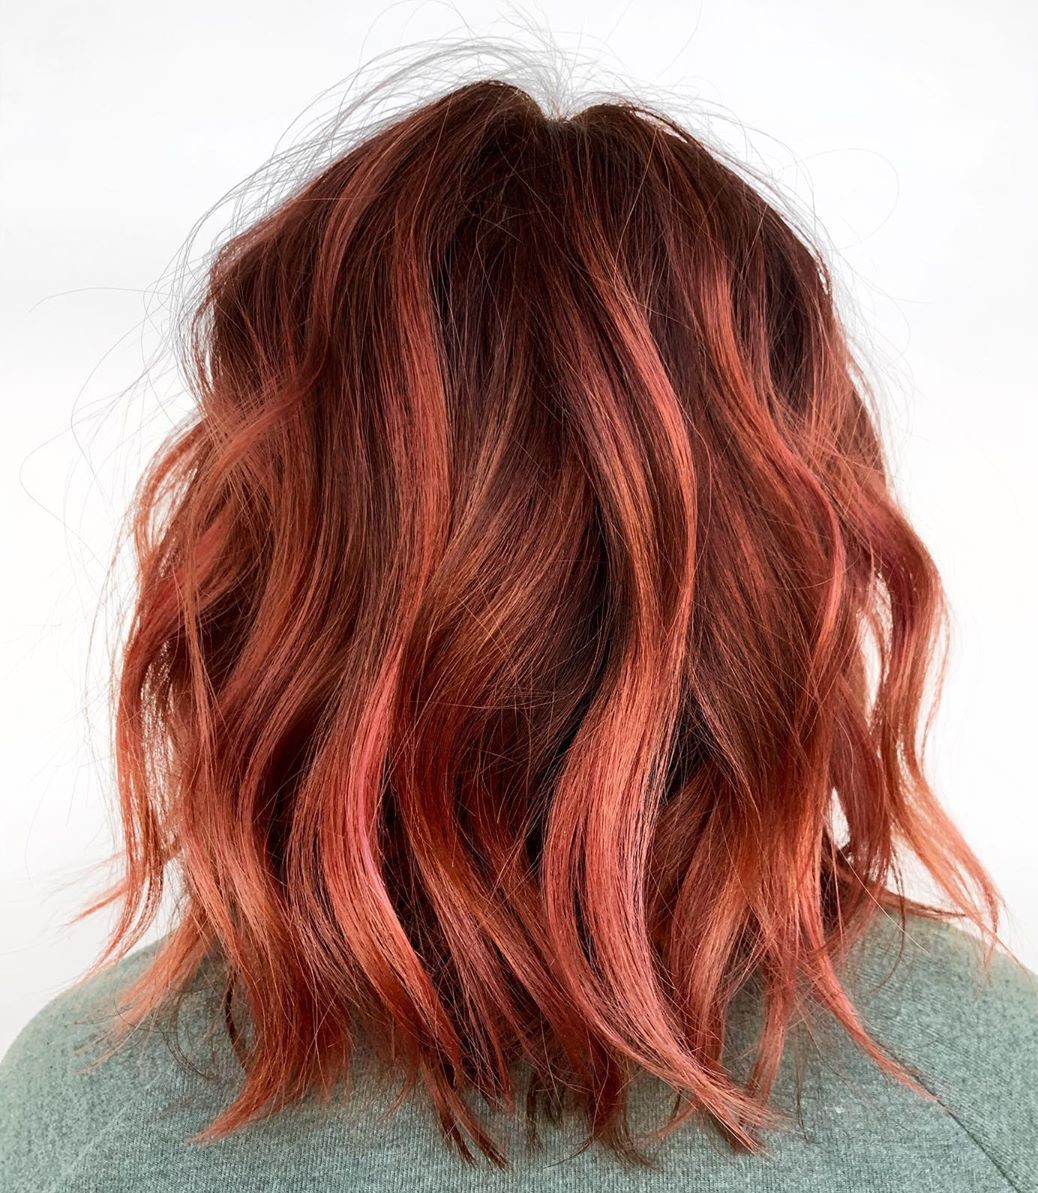 Reveal Your Fiery Nature with These 50 Red Ombre Hair Ideas